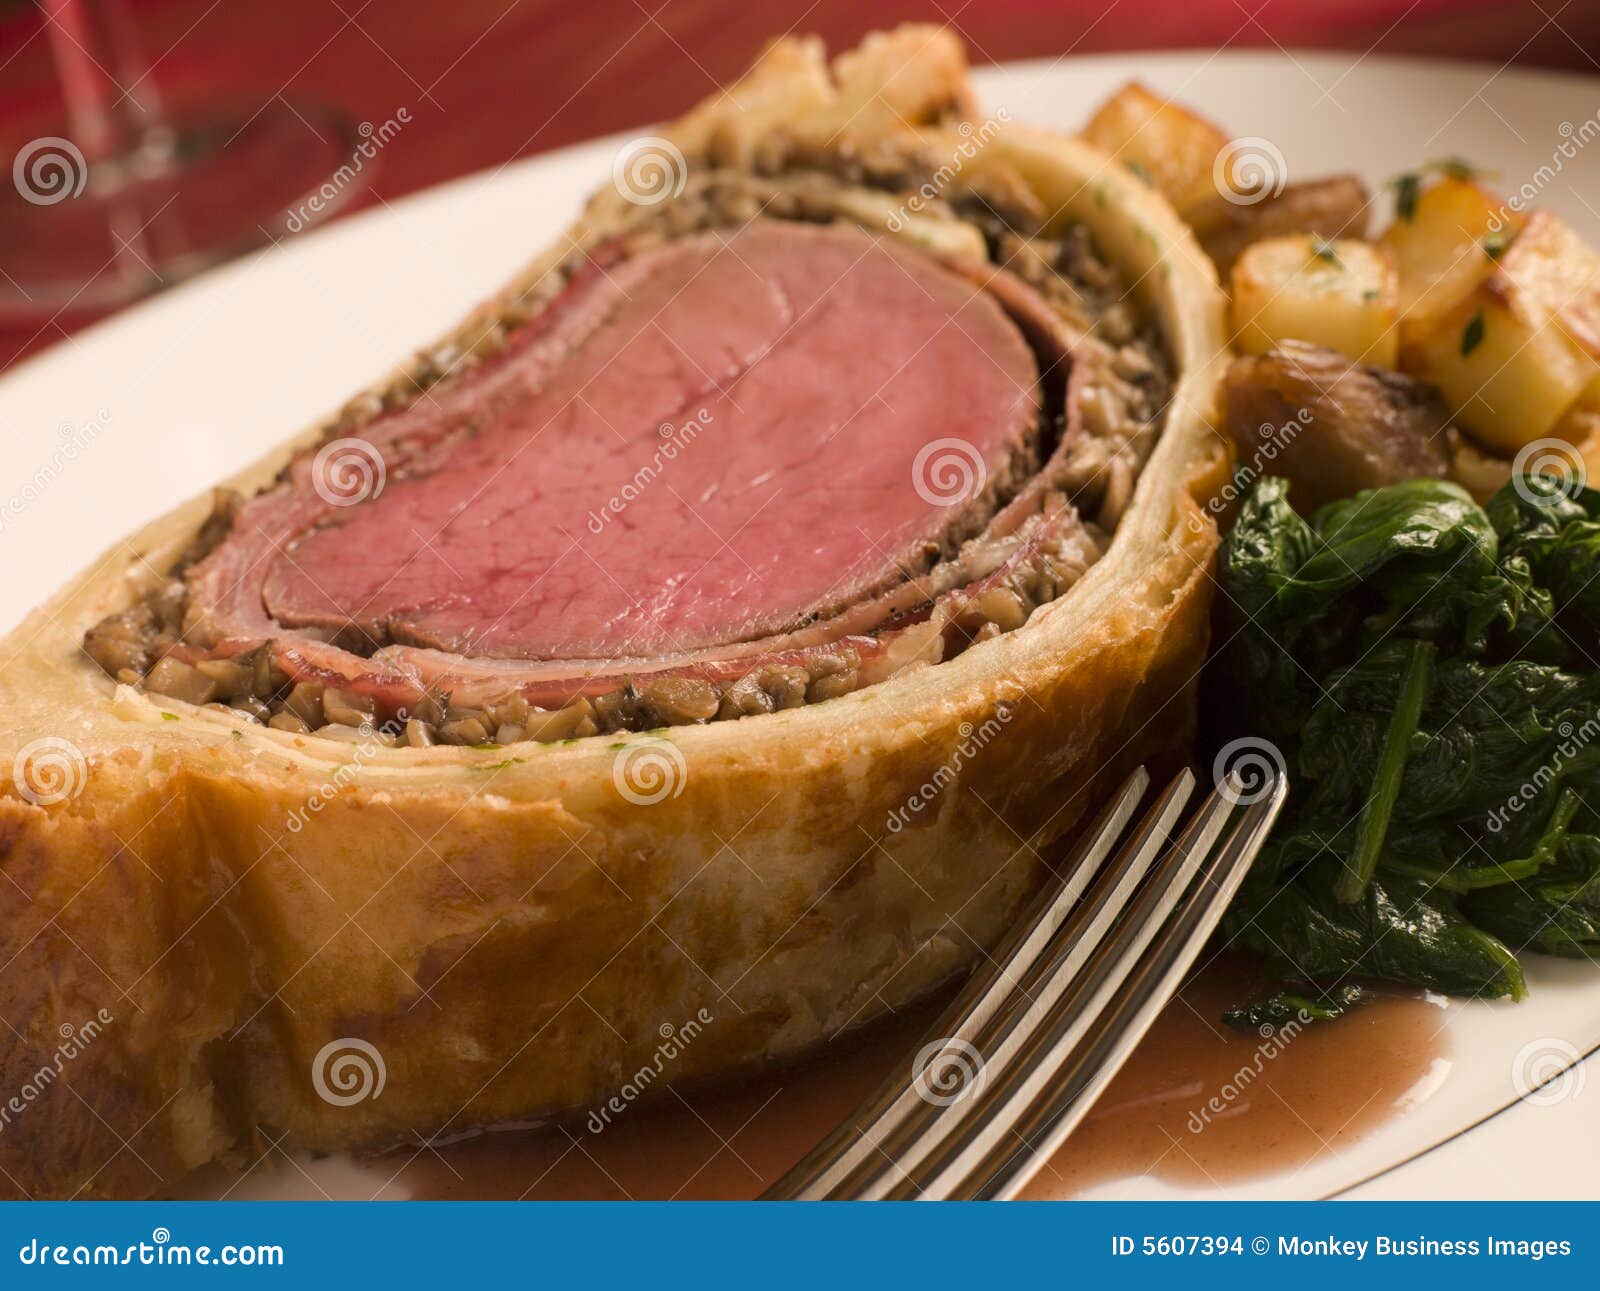 slice of beef wellington with spinach